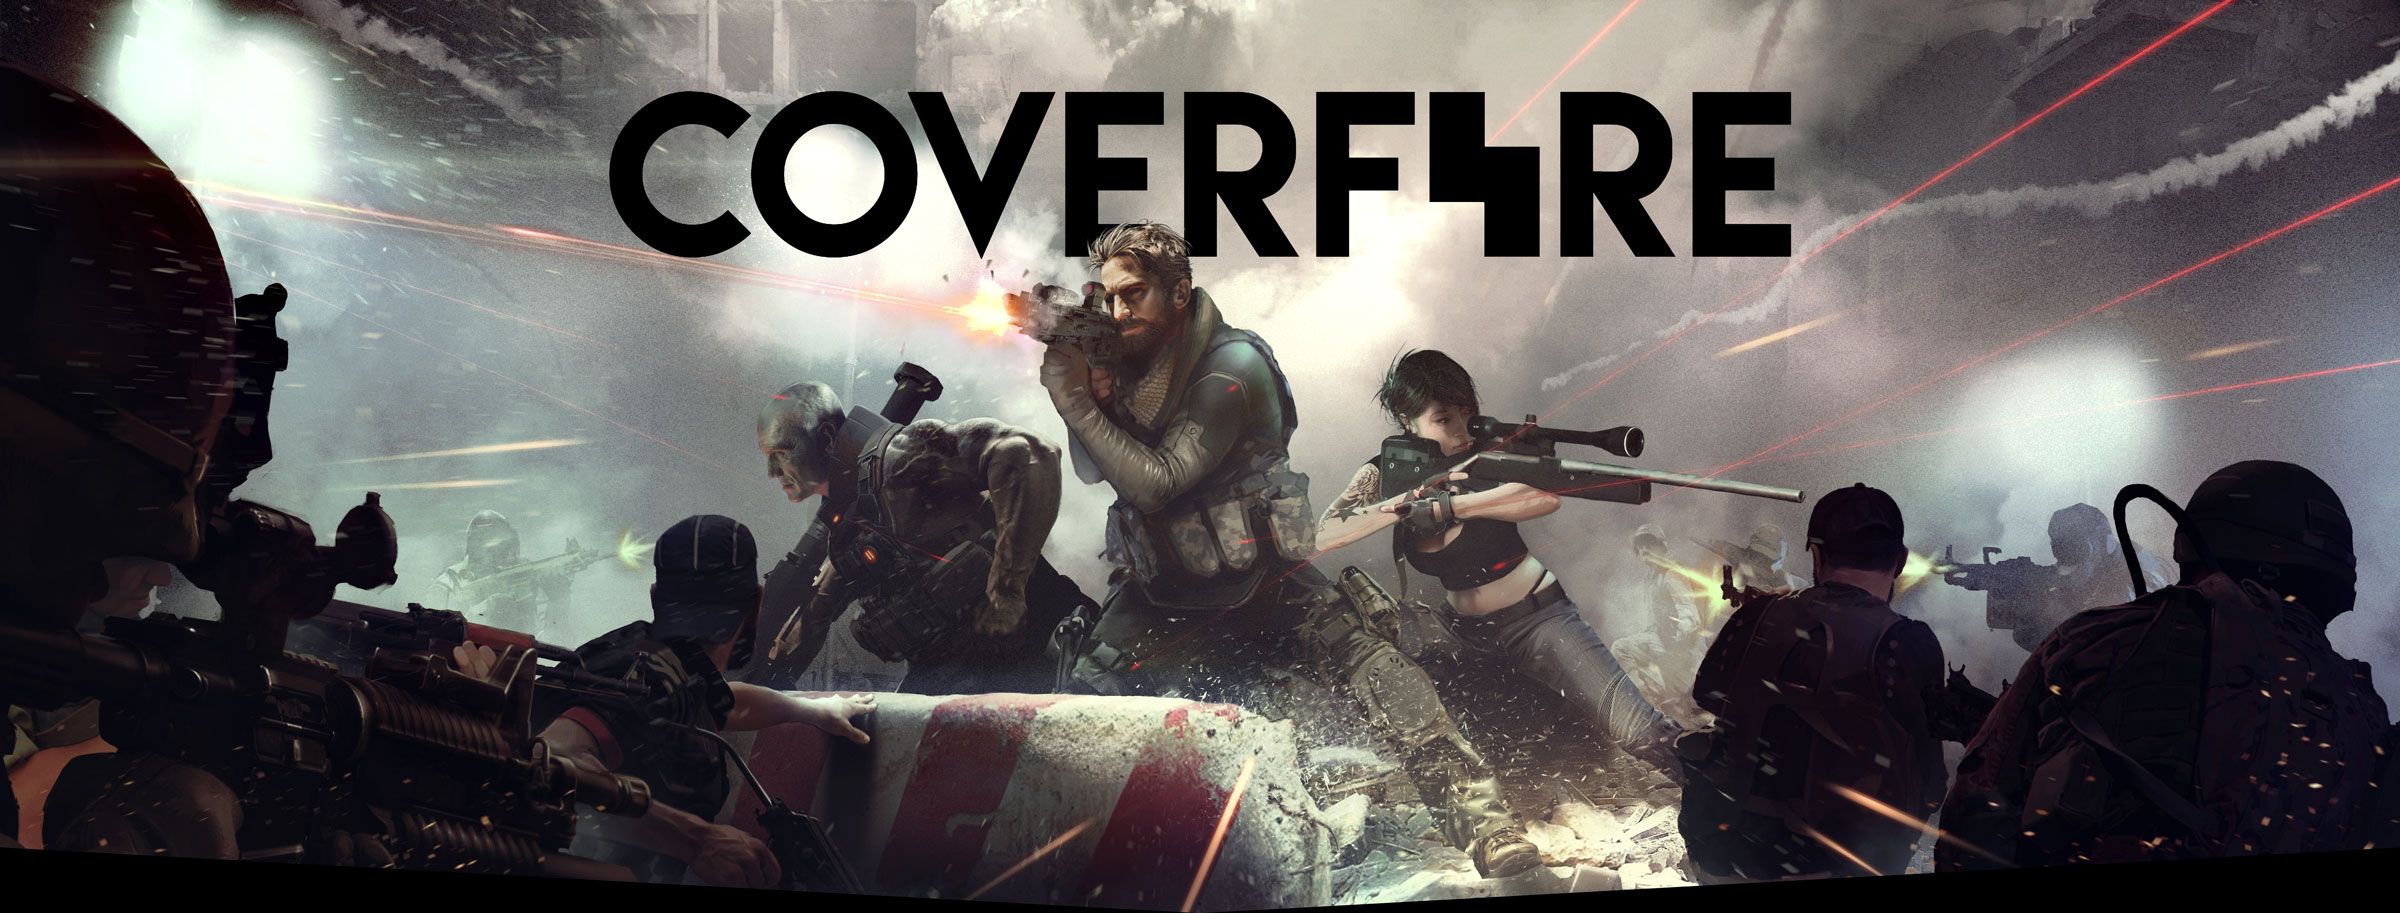 Cover Fire Official: Tips & Tricks Android / iPhone Game ? GG